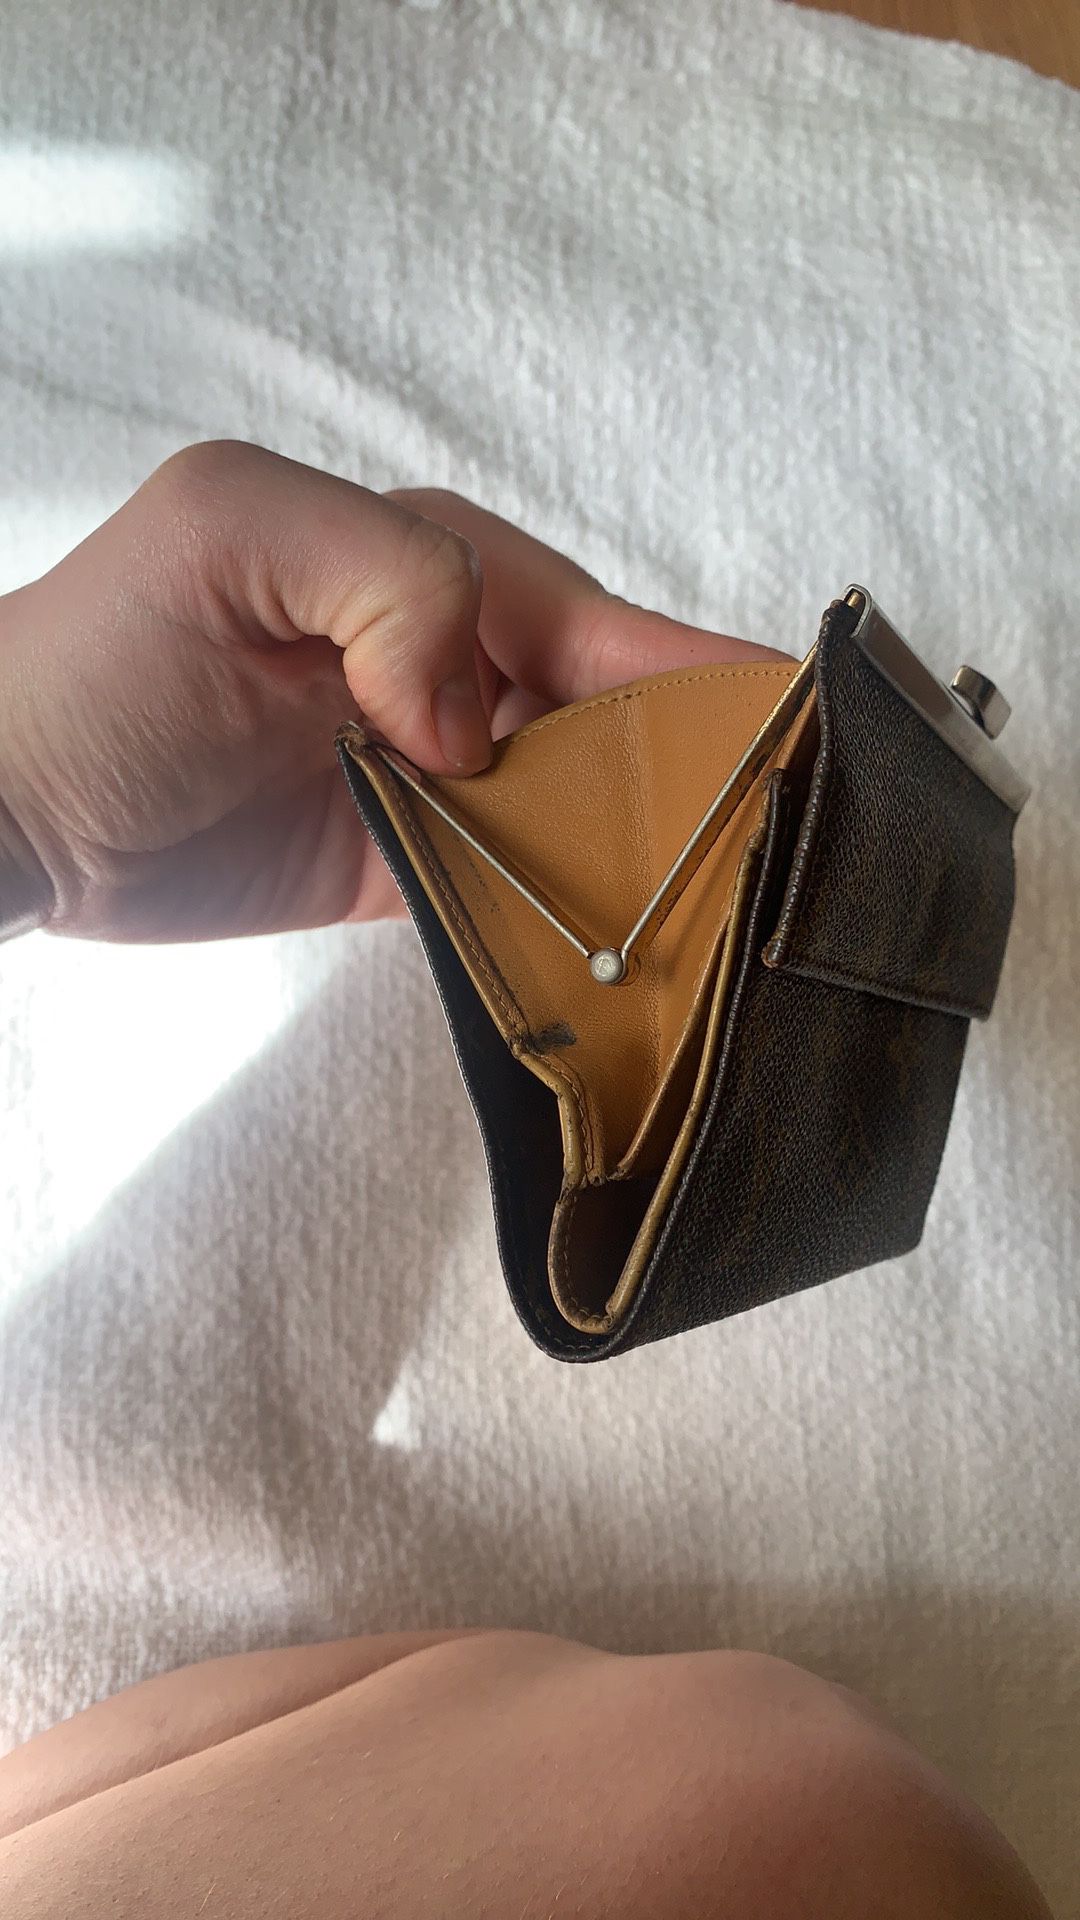 Louis Vuitton Coin Pouch - 45 For Sale on 1stDibs  lv coin pouch dupe,  fake louis vuitton coin purse, louis vuitton money pouch